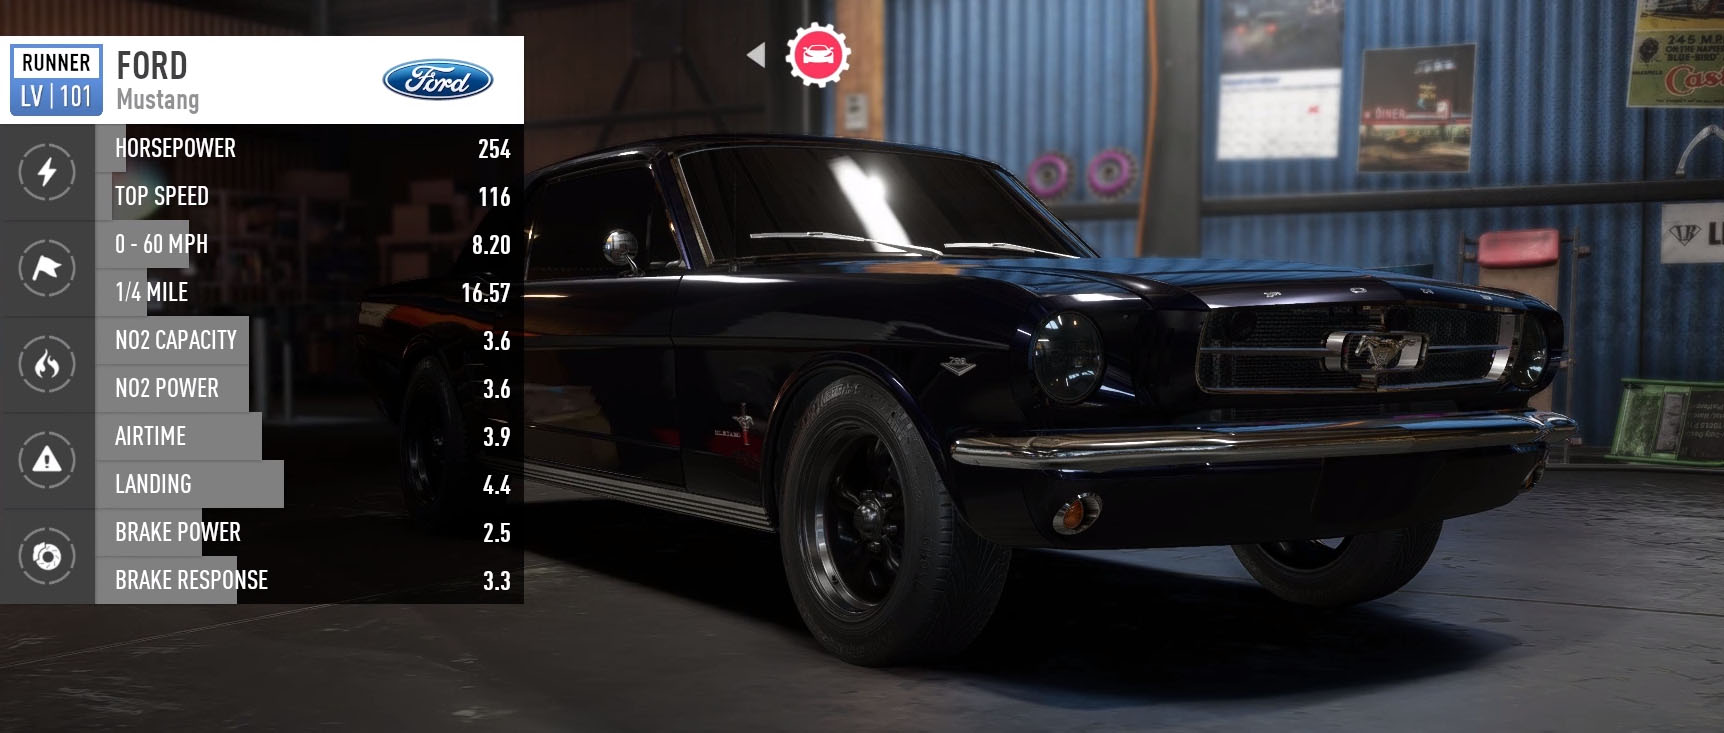 Мустанг payback. Ford Mustang 1965 Payback. Ford Mustang 1965 NFS Payback. NFS Payback реликвии Ford Mustang 1965. Реликвия Форд Мустанг NFS Payback.